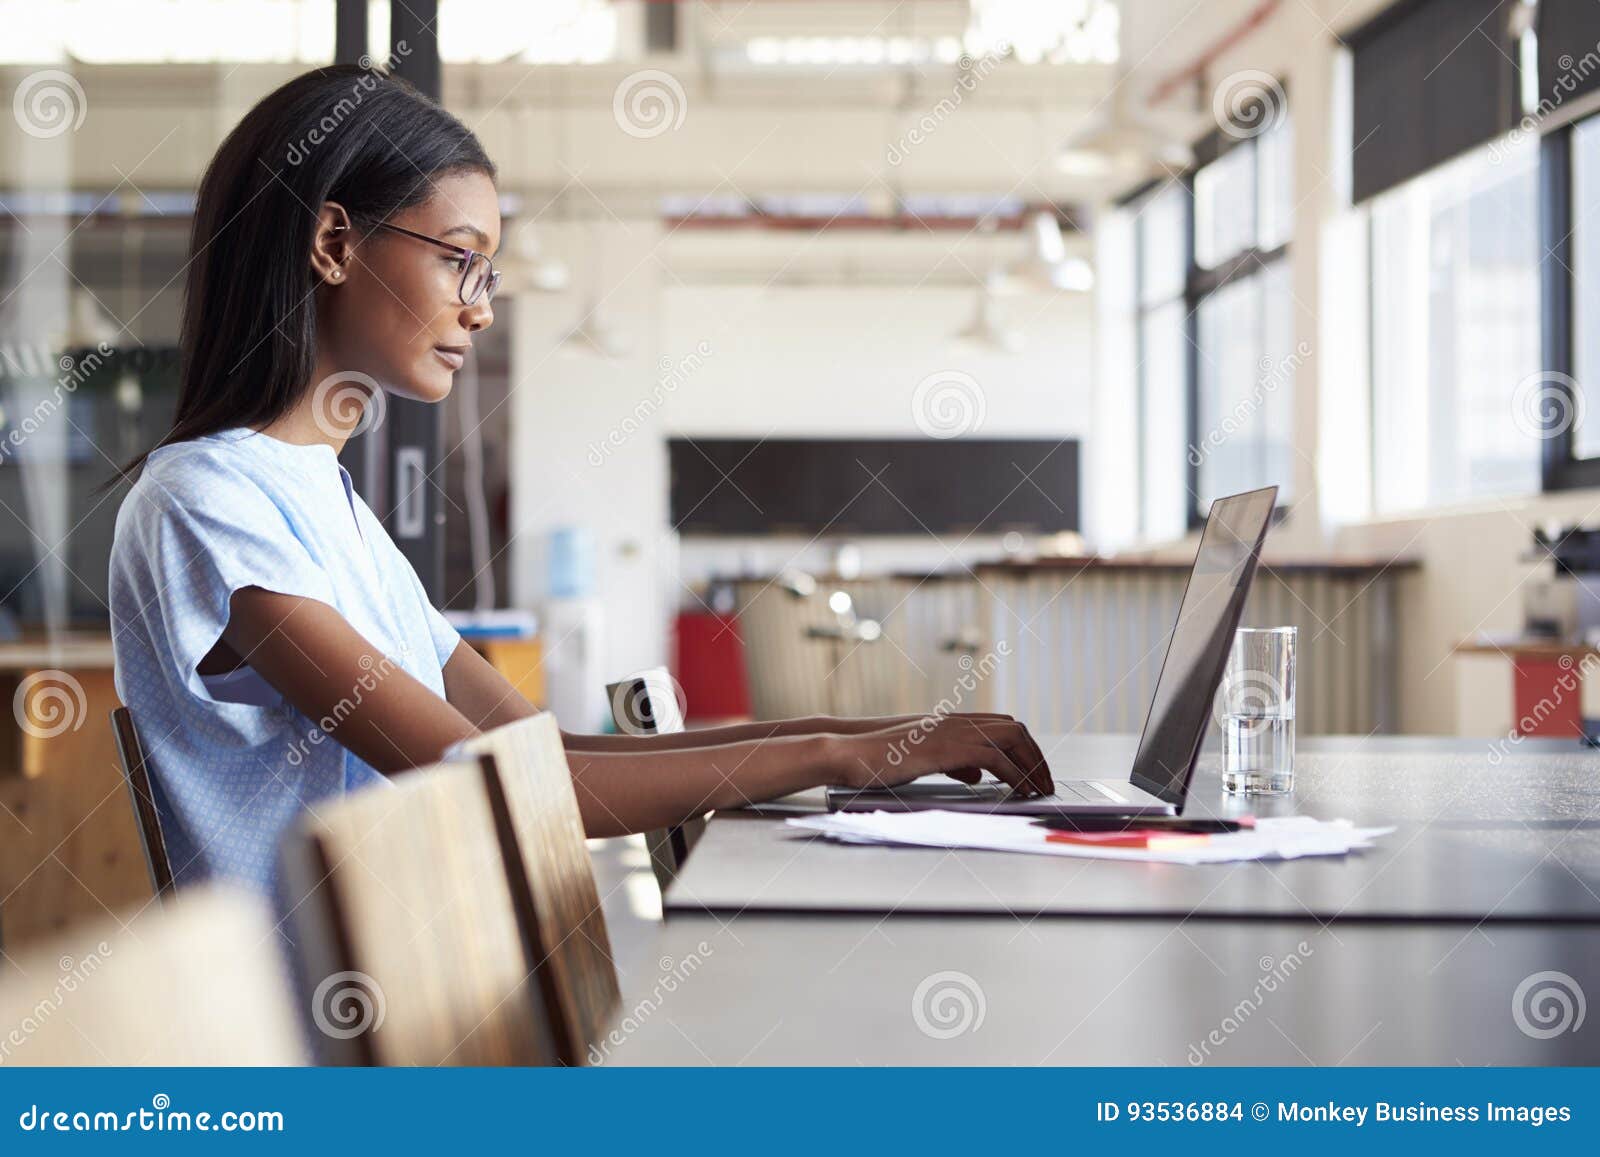 young black woman working in office using a laptop computer